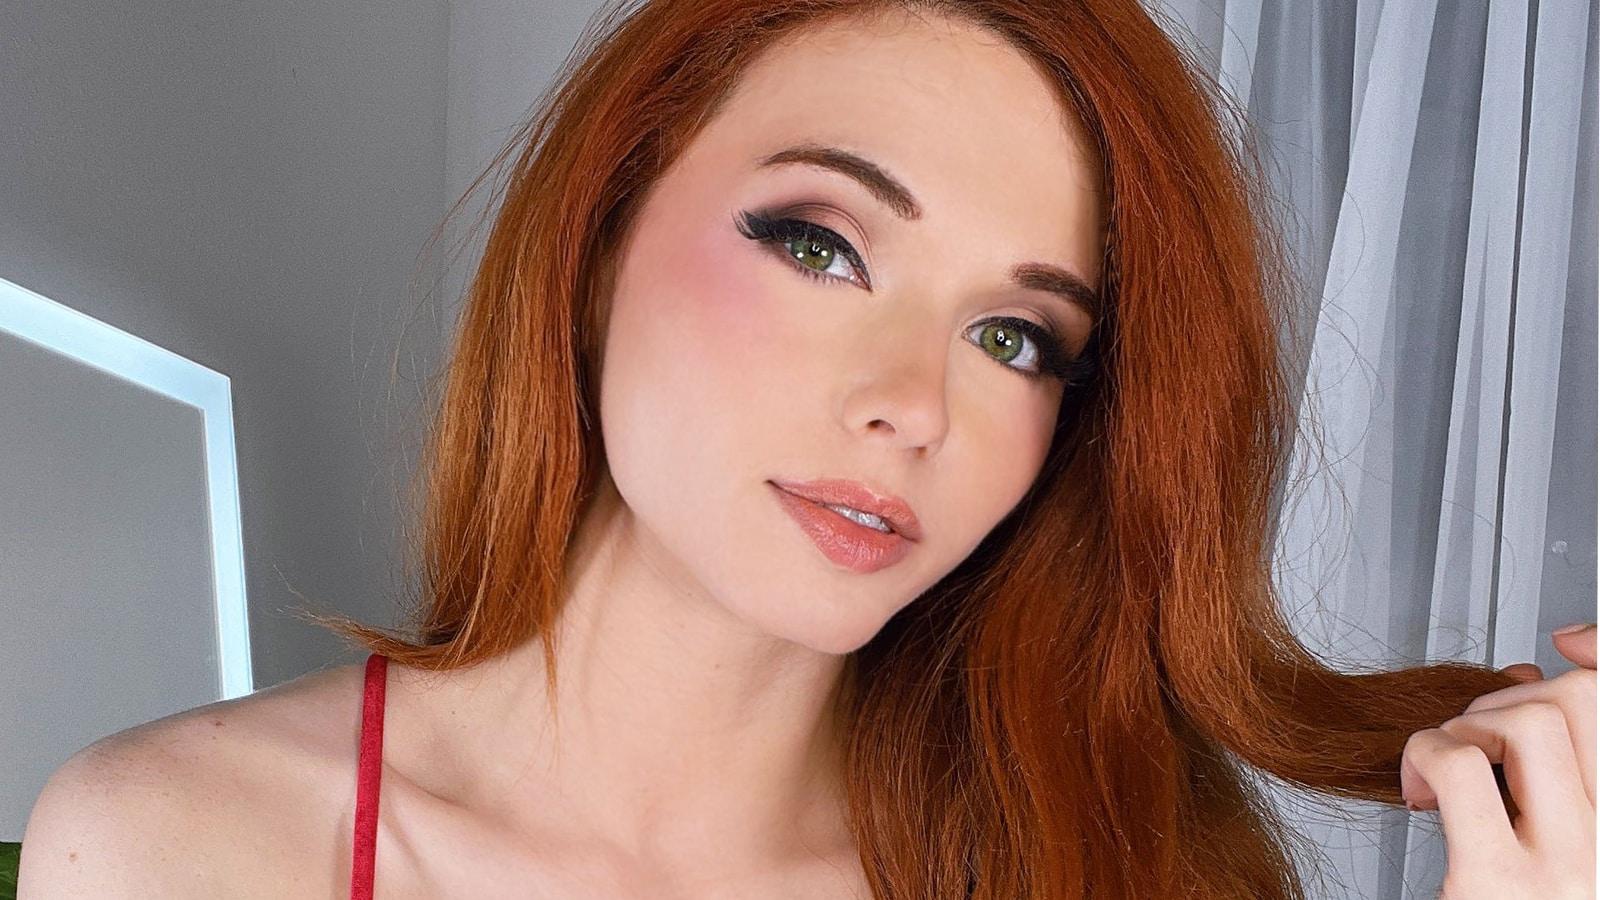 Most-watched female Twitch streamers in 2022: Amouranth dominates